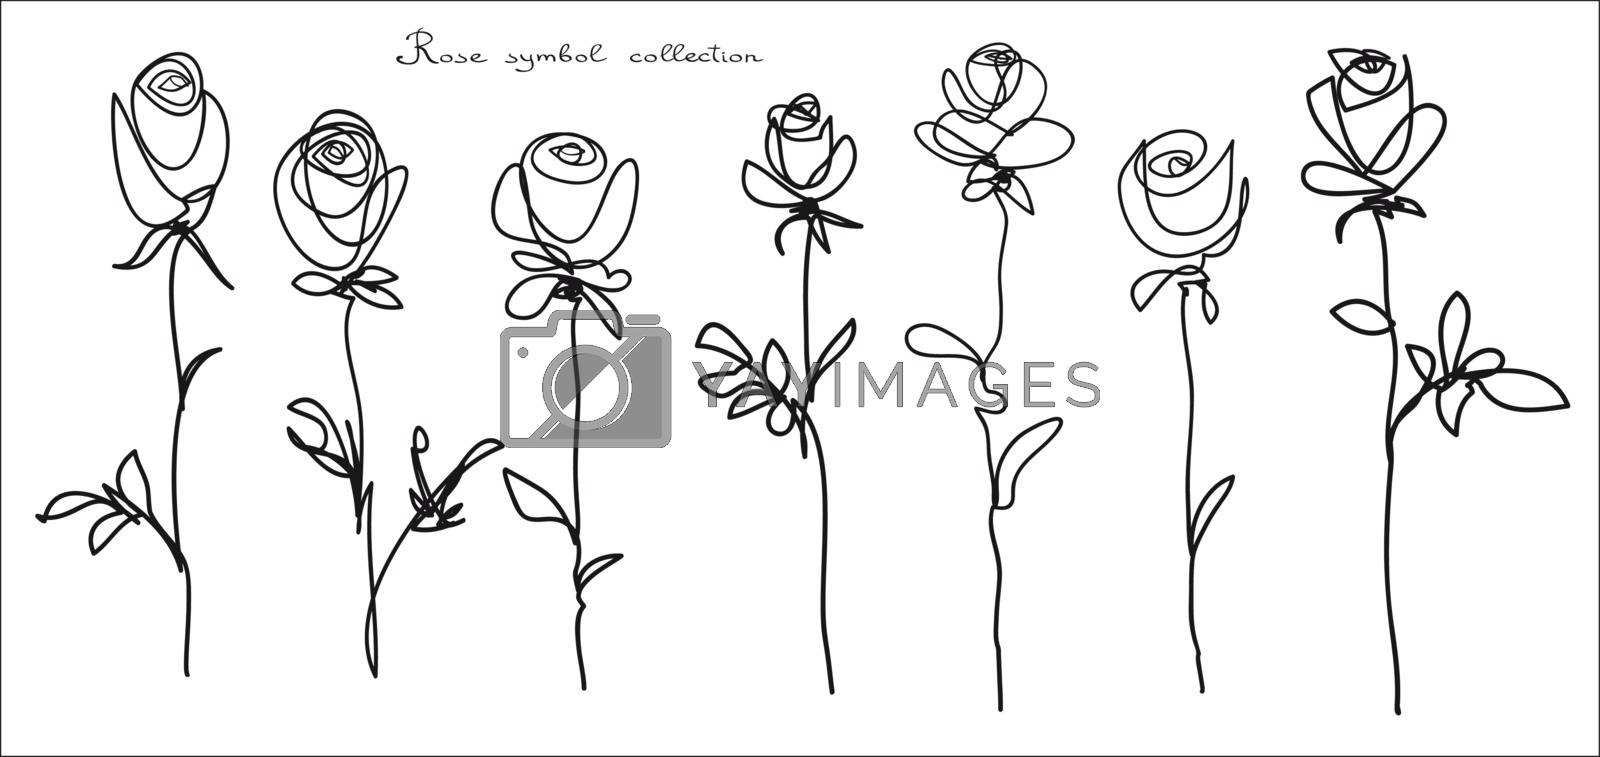 Royalty free image of Roses. Collection of isolated flower sketch on white background by ESSL